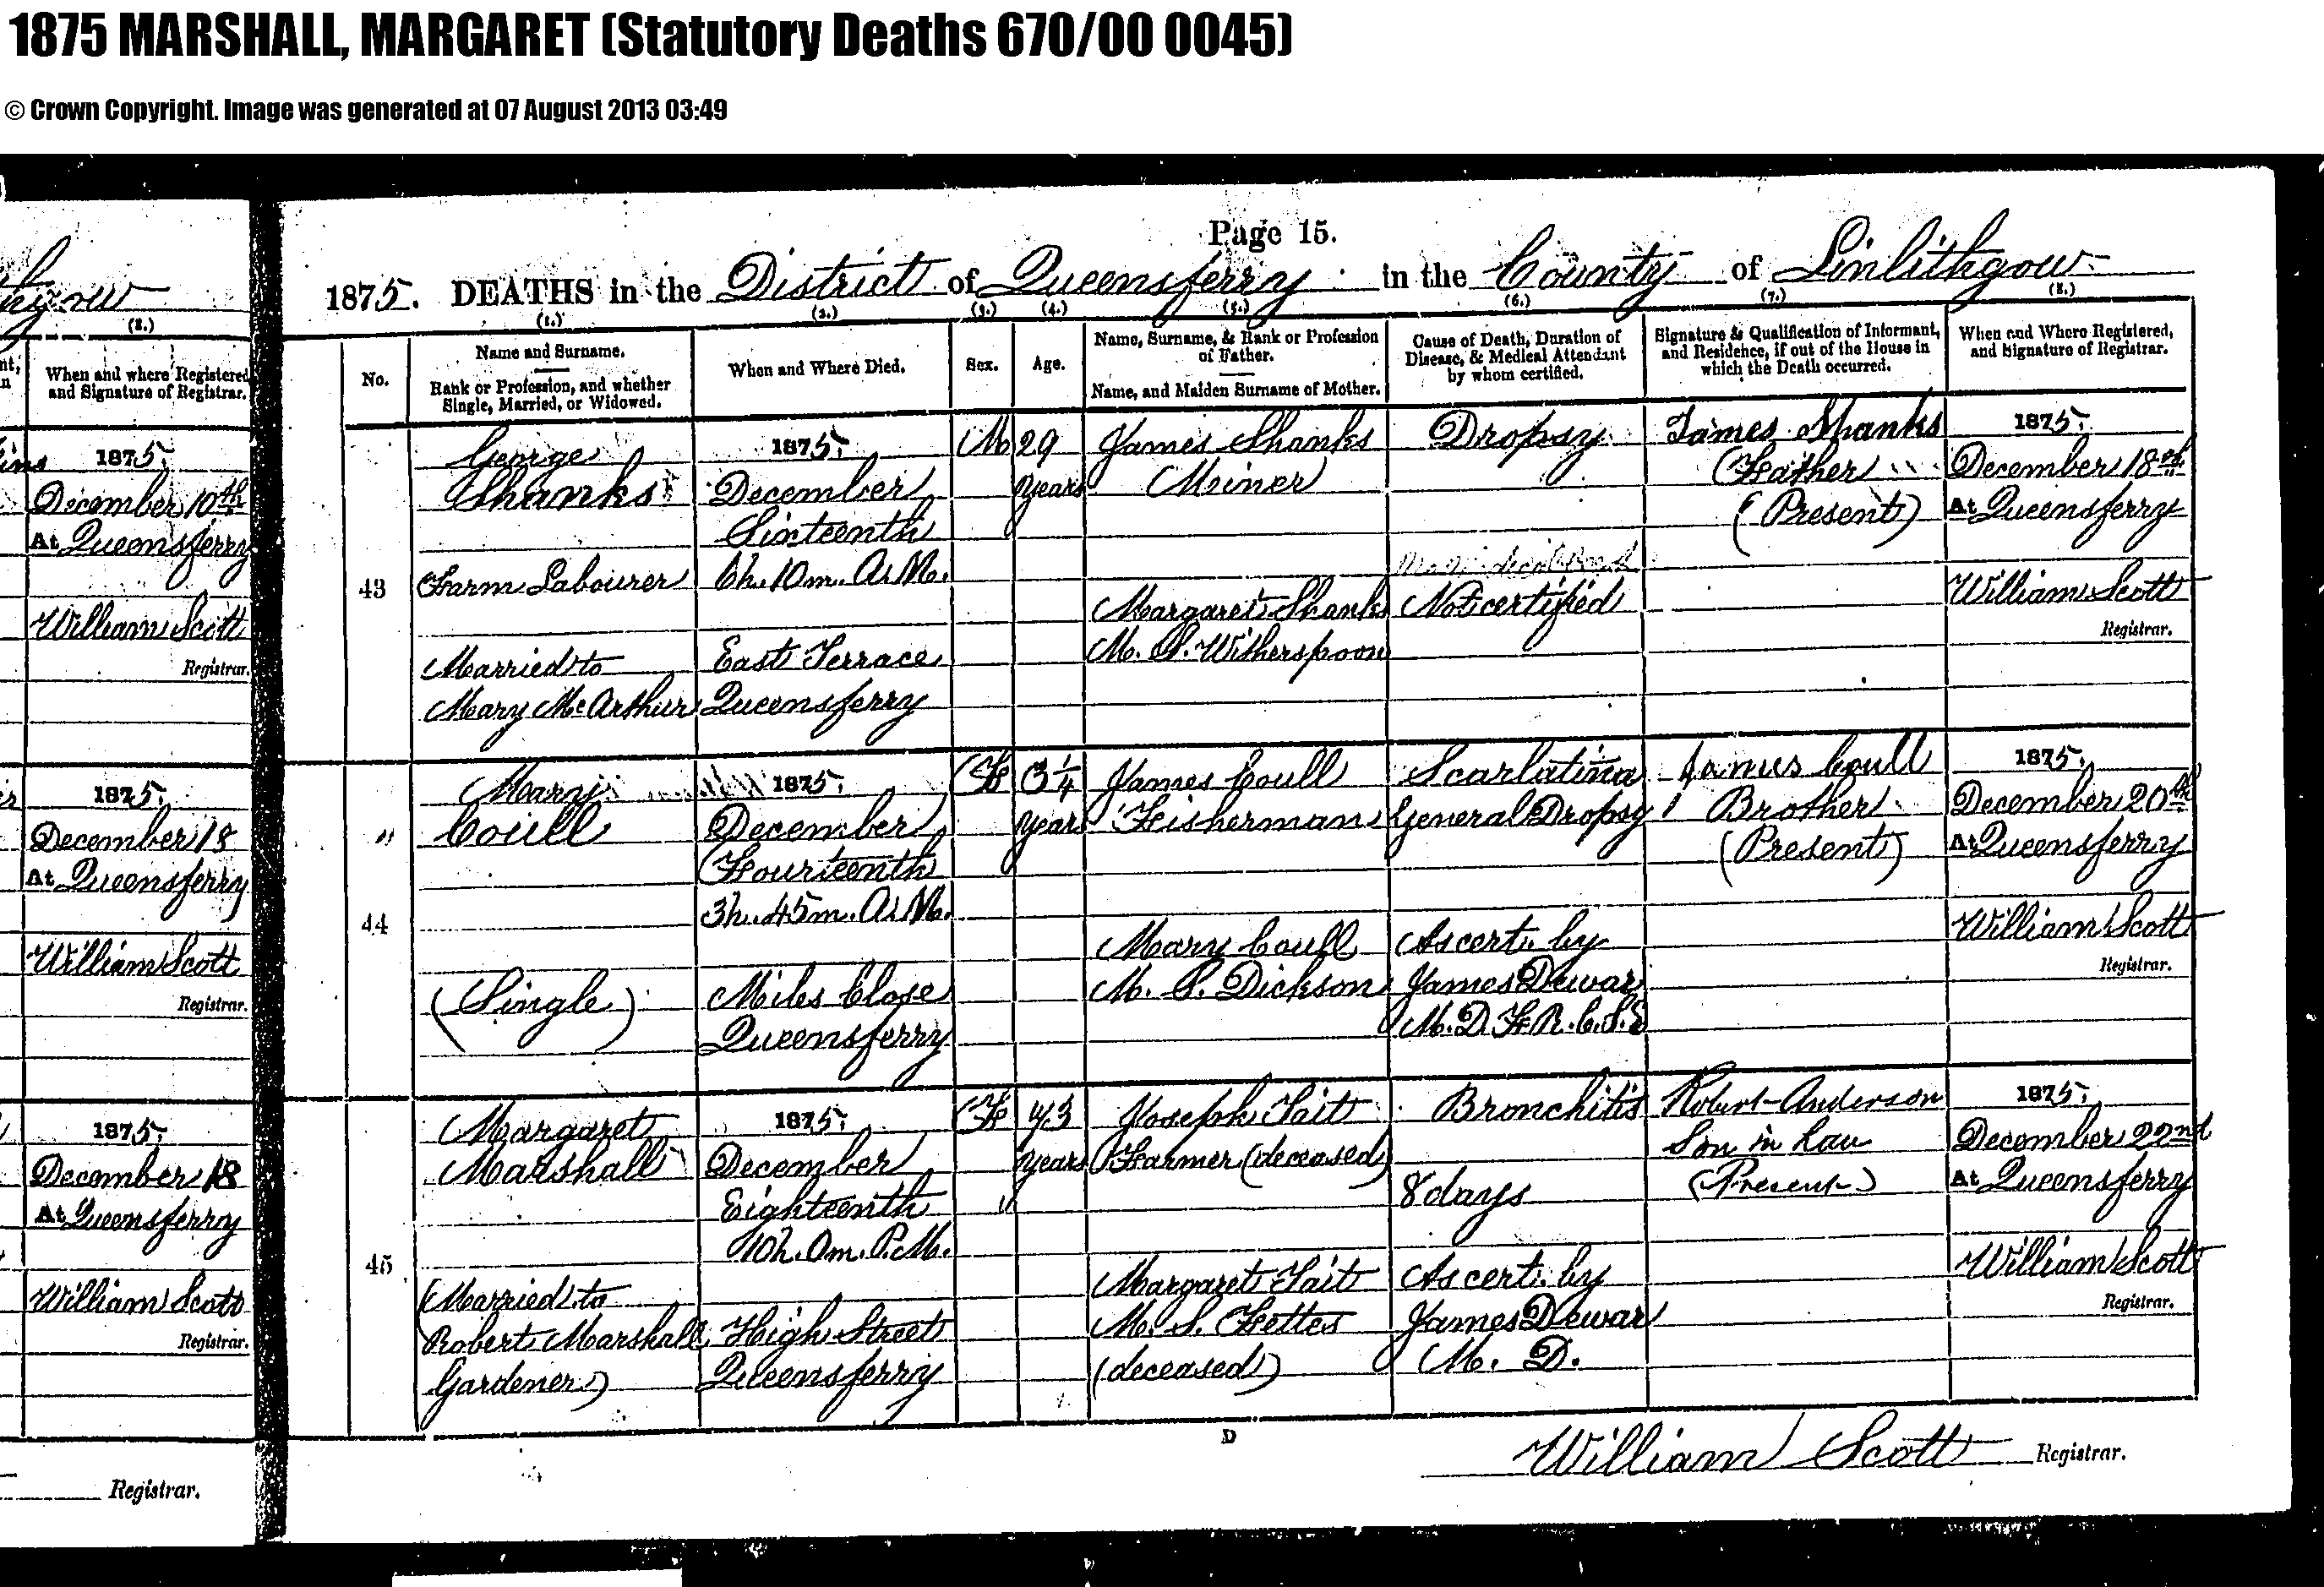 MargTaitDeath, 1875, Linked To: <a href='profiles/i2281.html' >Robert Marshall</a> and <a href='profiles/i2144.html' >Margaret Tait 🧬</a>